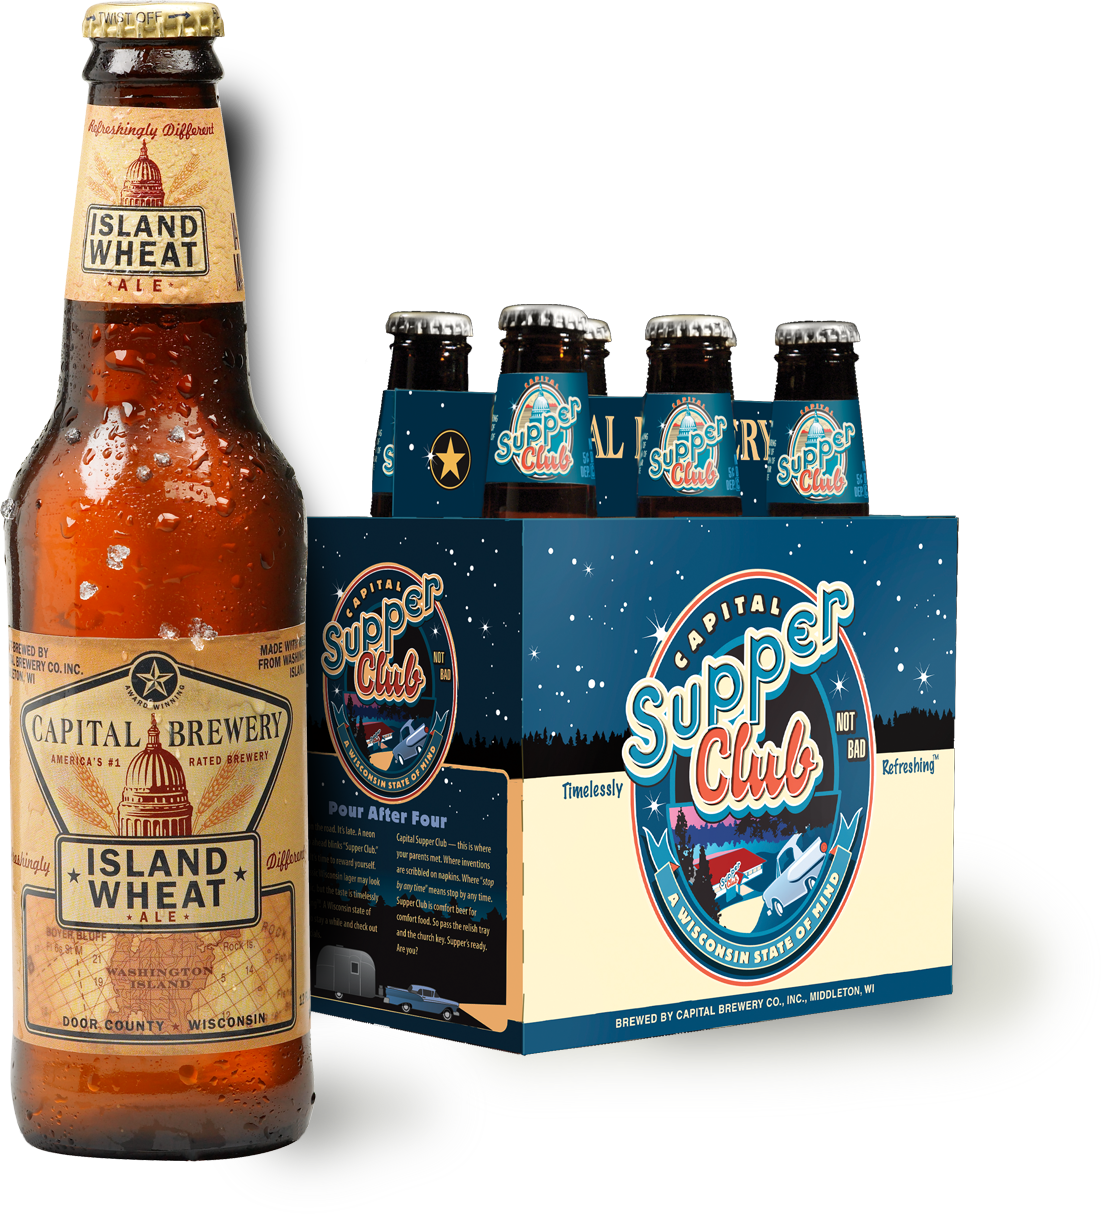 Capital Brewery Supper Club six-pack and Island Wheat bottle